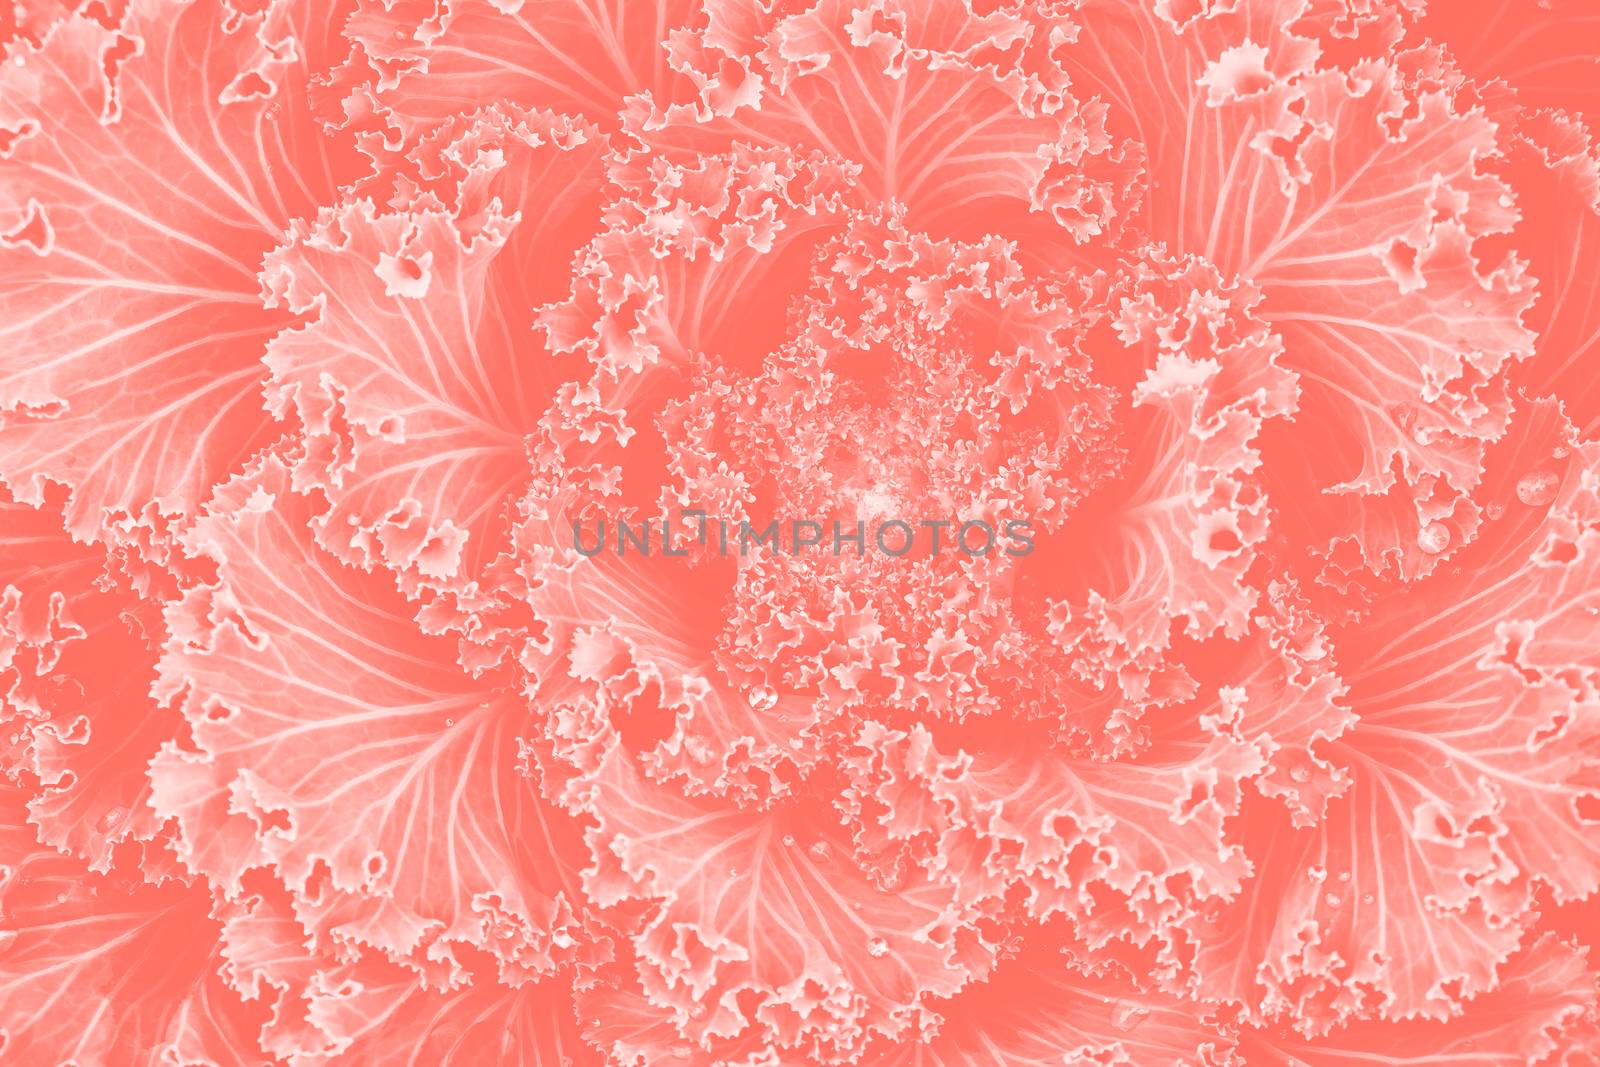 Macro living coral cabbage ornamental background Pantone color of the year 2019